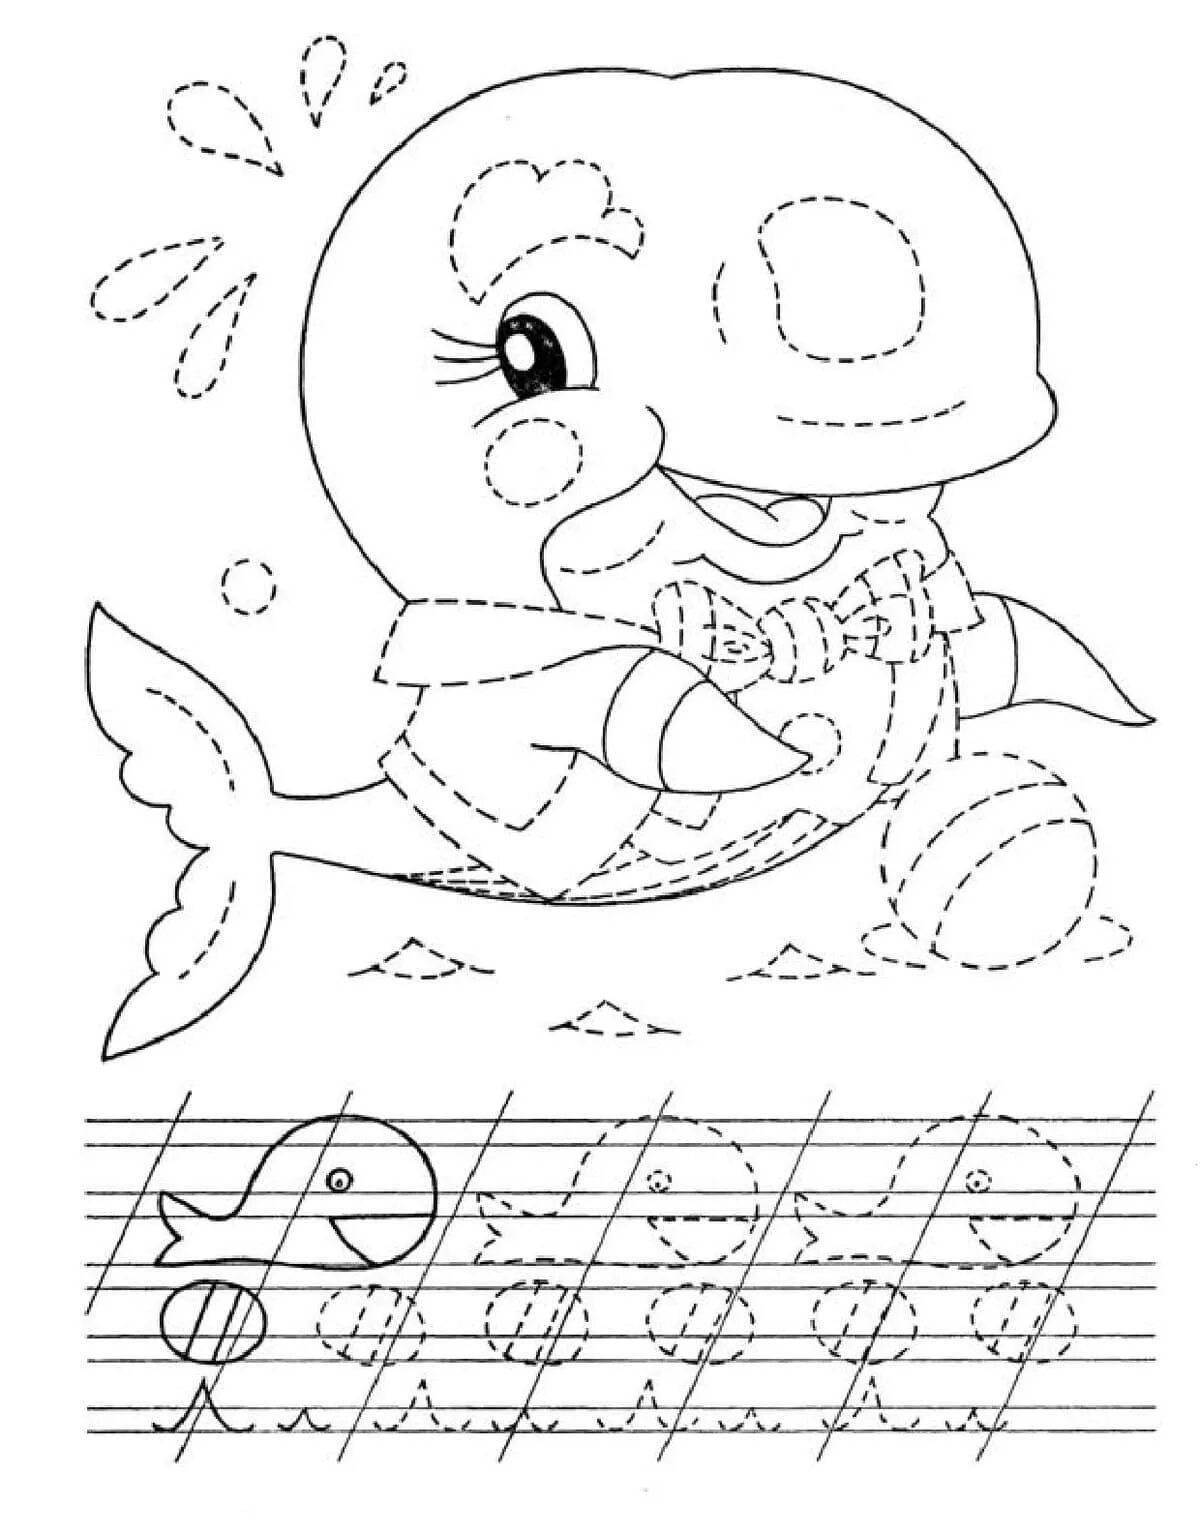 Joyful recipe coloring book for 4-5 year olds